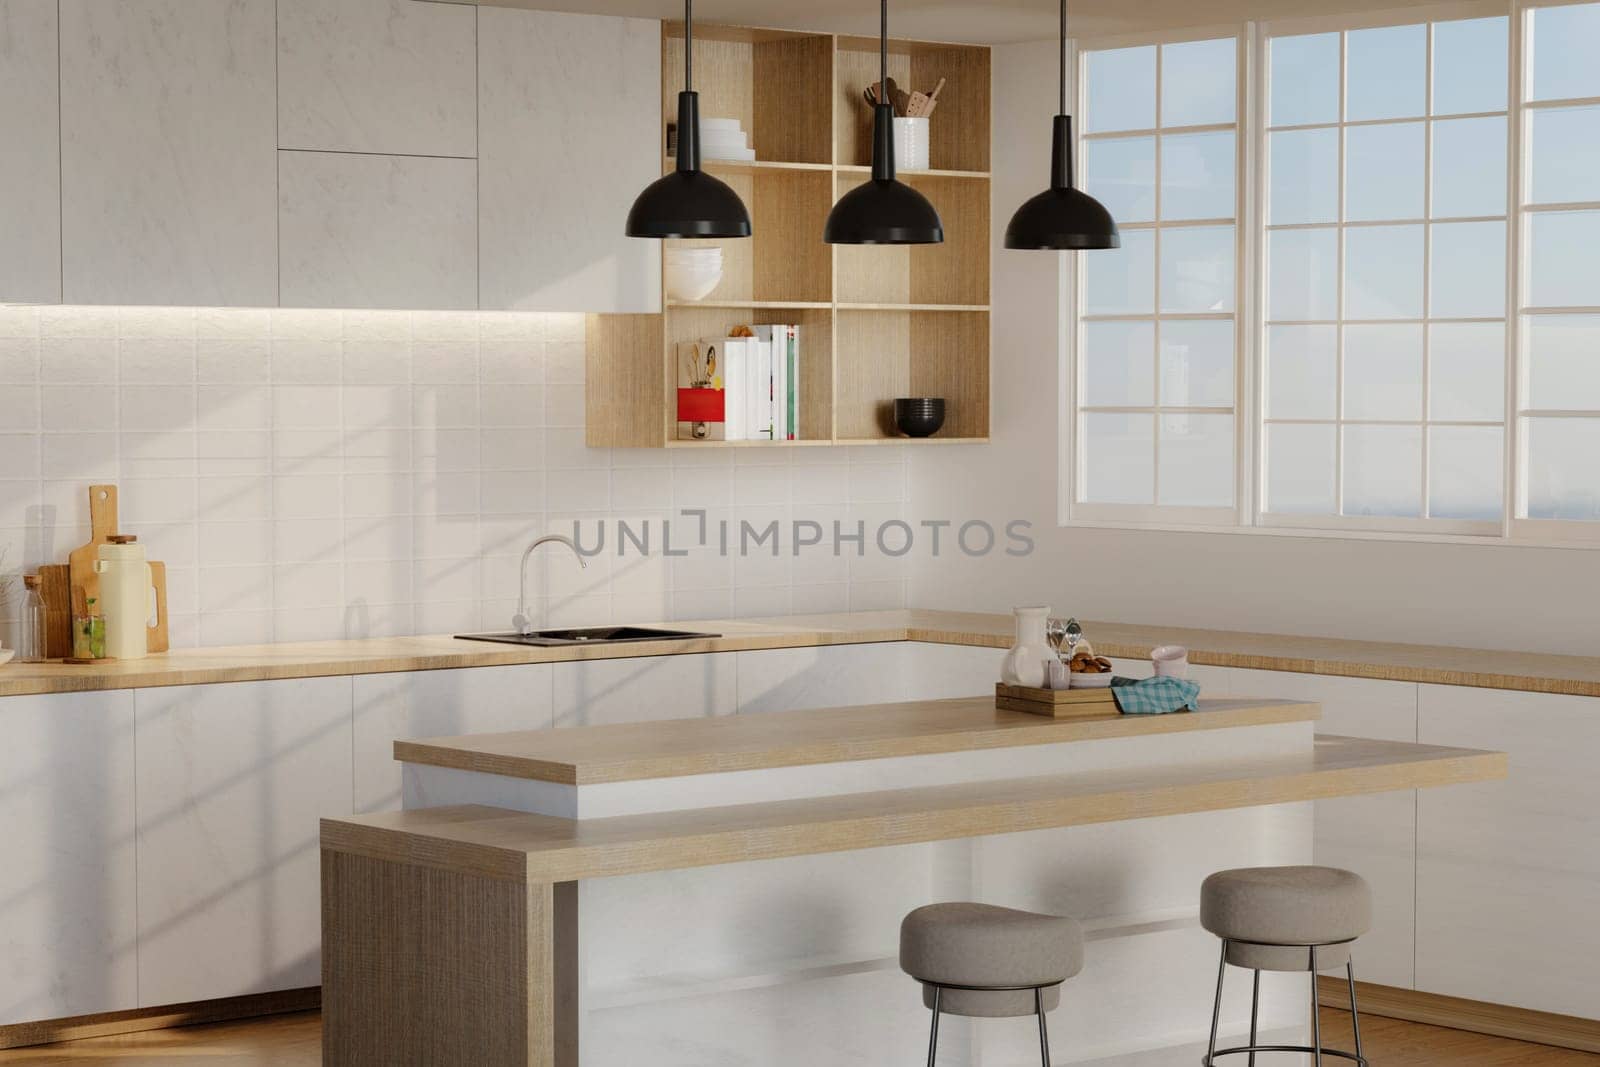 Minimal cozy kitchen white modern interior in farmhouse style. nordic kitchen in loft apartment. 3D rendering. by meepiangraphic